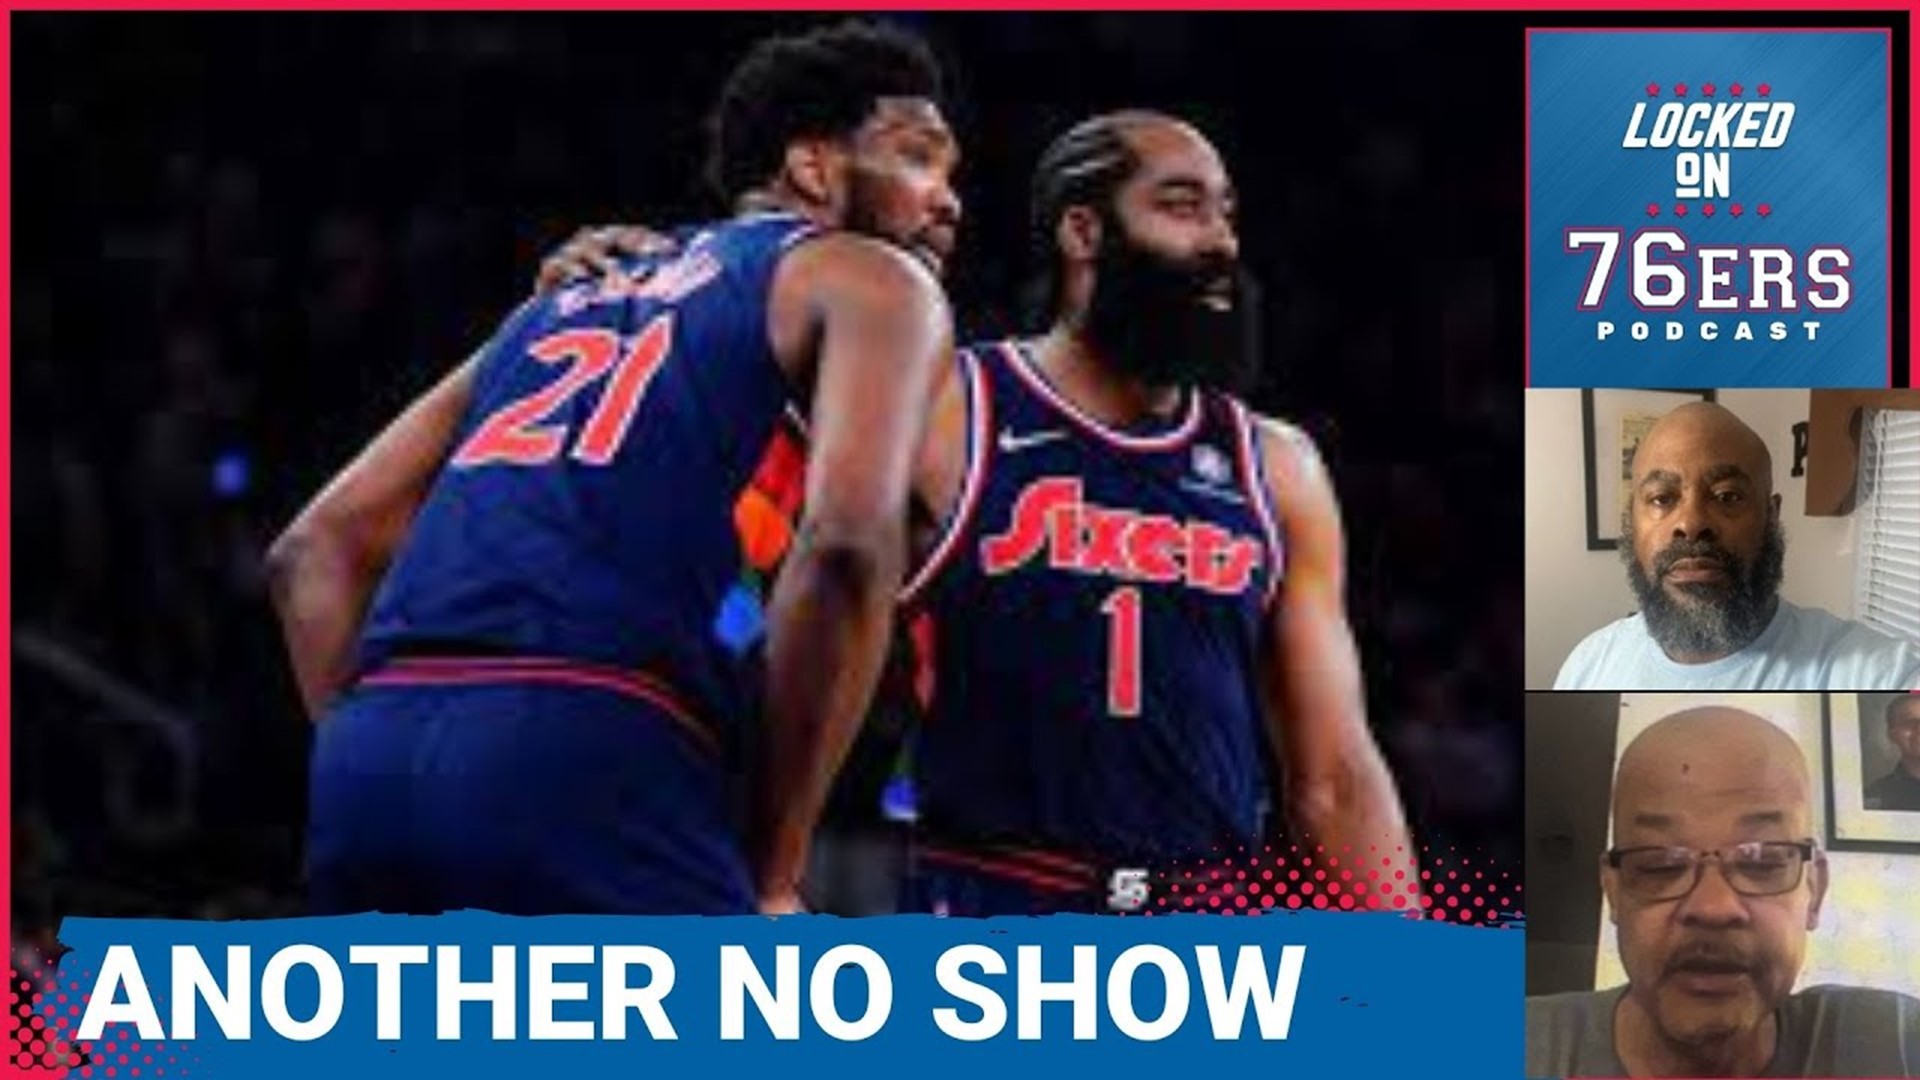 Joel Embiid and James Harden remain sidelined, equal-opportunity offense, and Kelly Oubre may be him